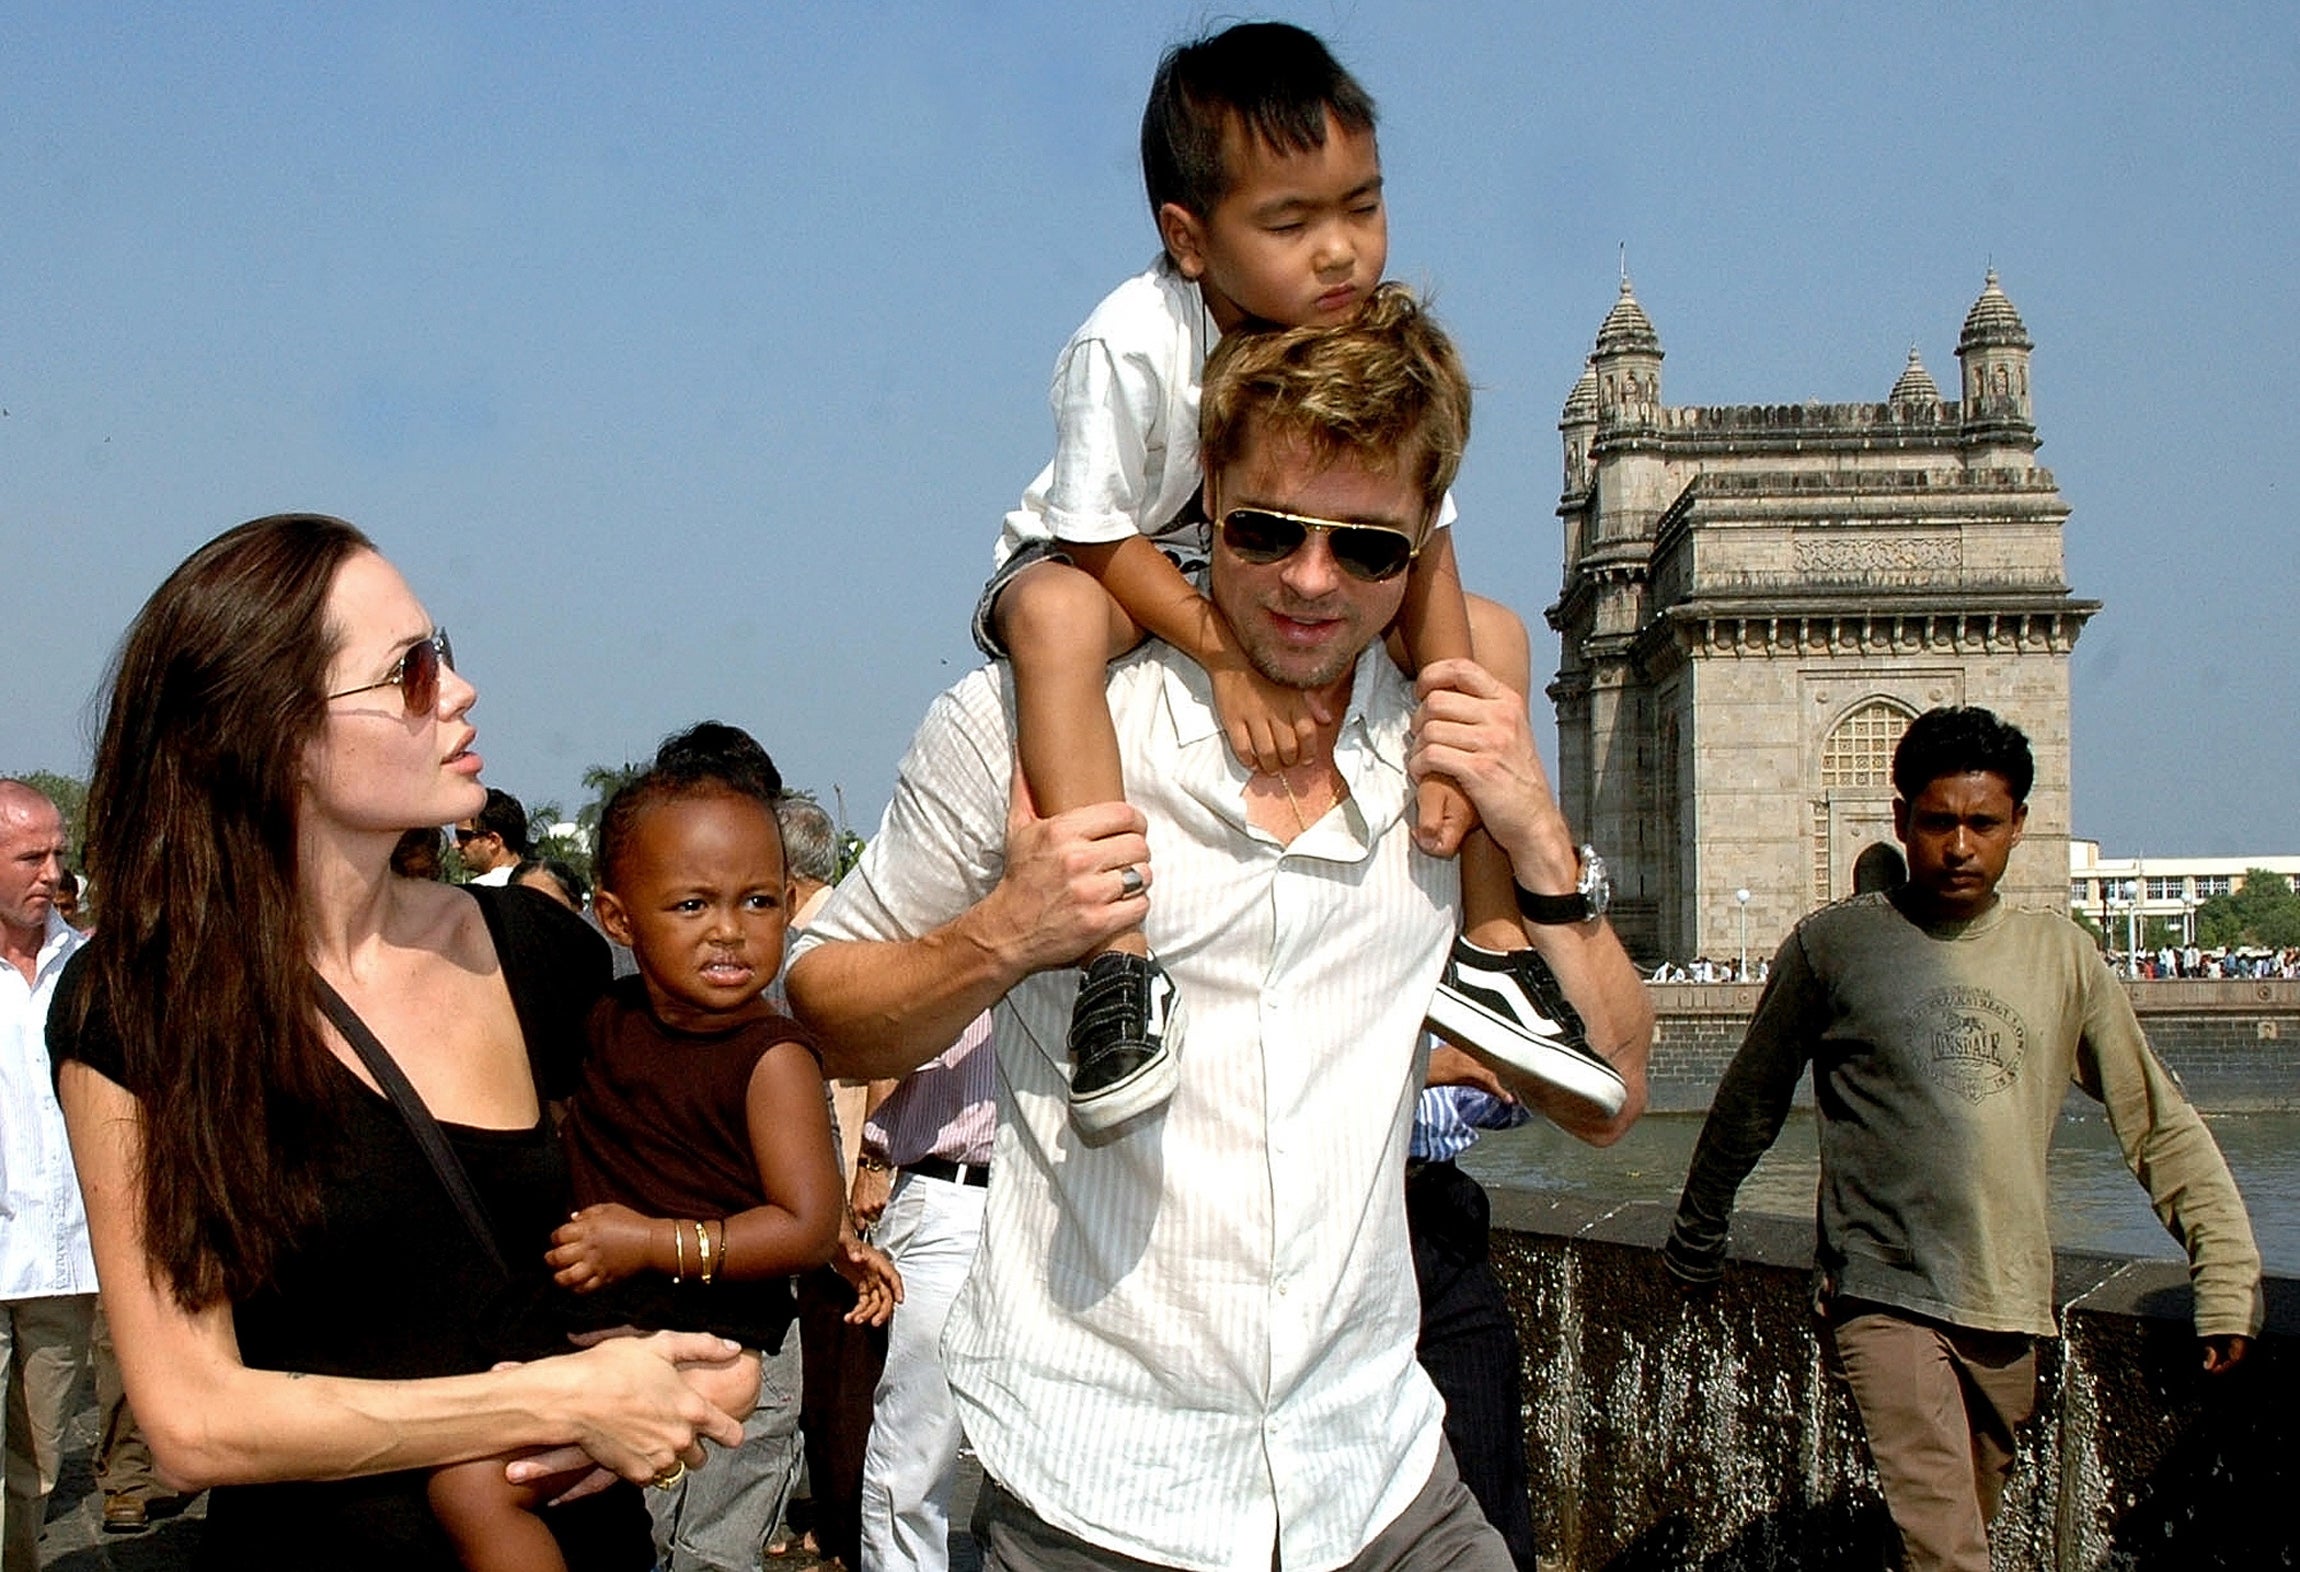 Jolie and Pitt photographed in India, alongwith Maddox and Zahara, while filming ‘A Mighty Heart’ in 2006